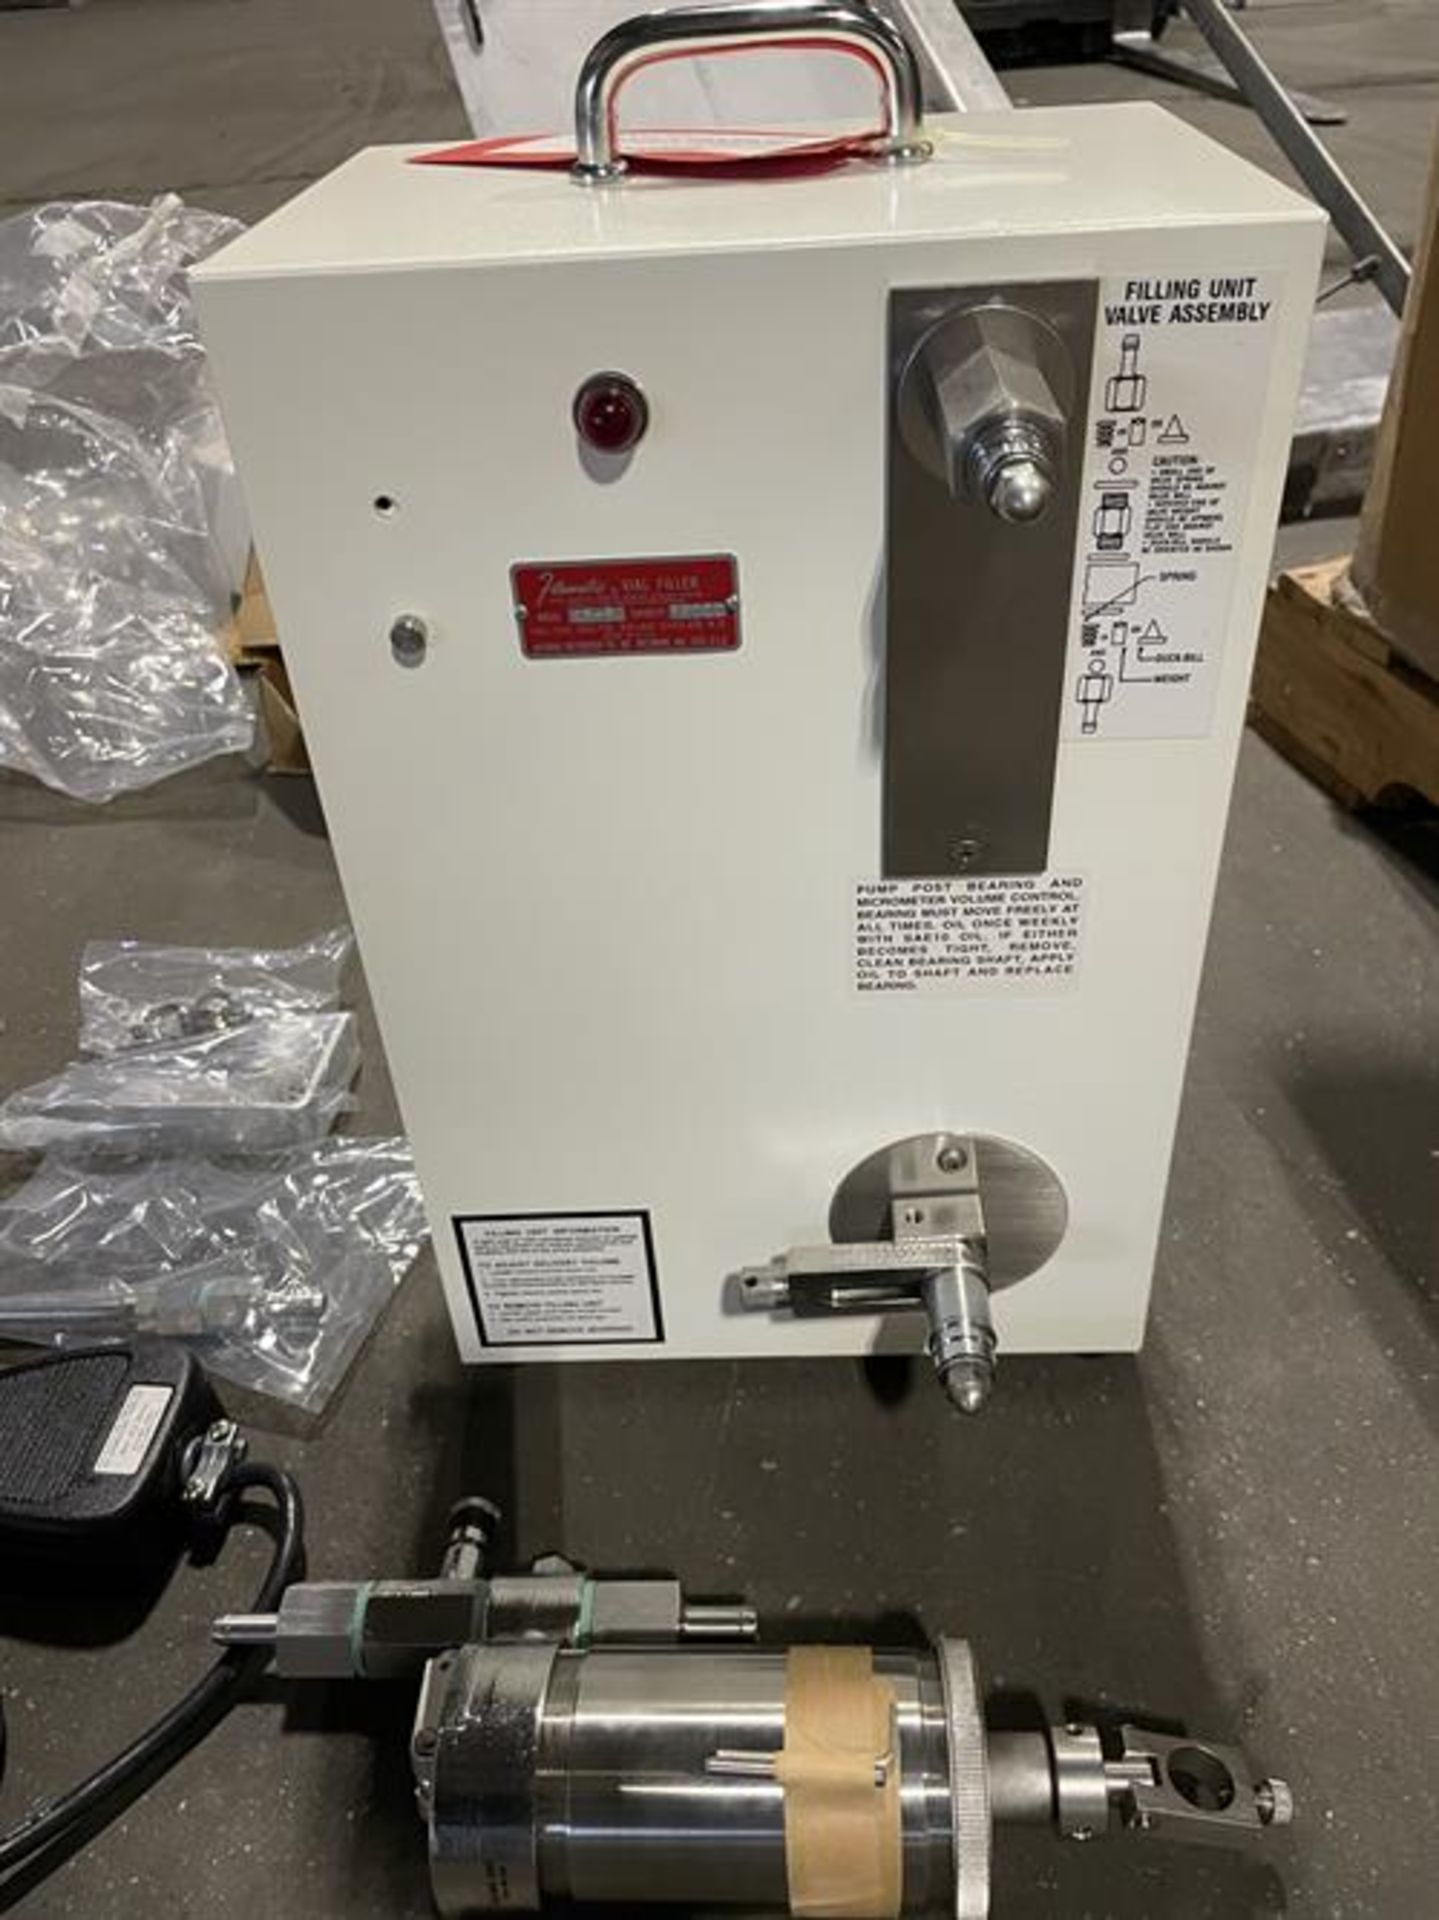 National Instruments Filamatic model AB-8 Piston Filler - Purchased new and never used - FUS260, - Image 3 of 6